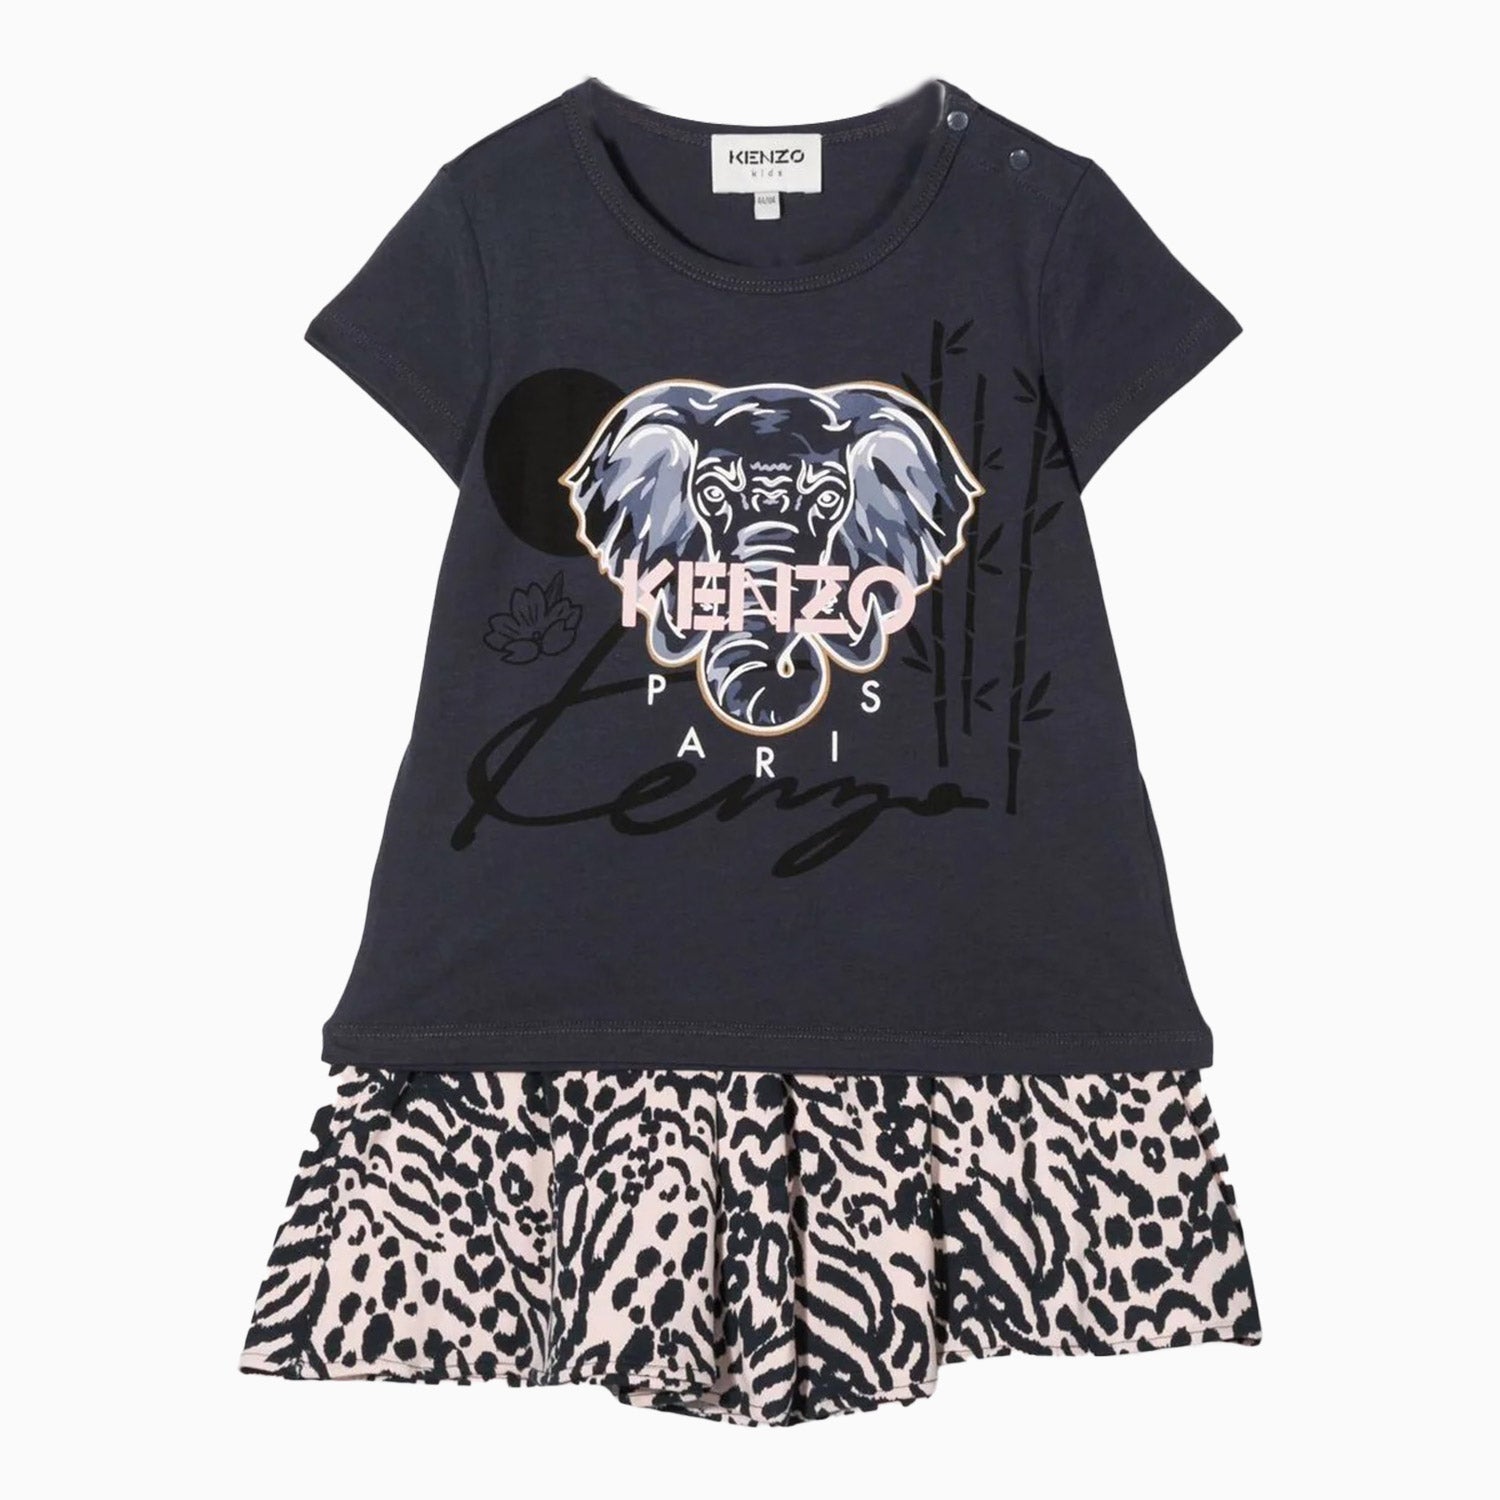 Kenzo Kid's Animal Print Outfit Toddlers - Color: Blue/ Pink - Kids Premium Clothing -